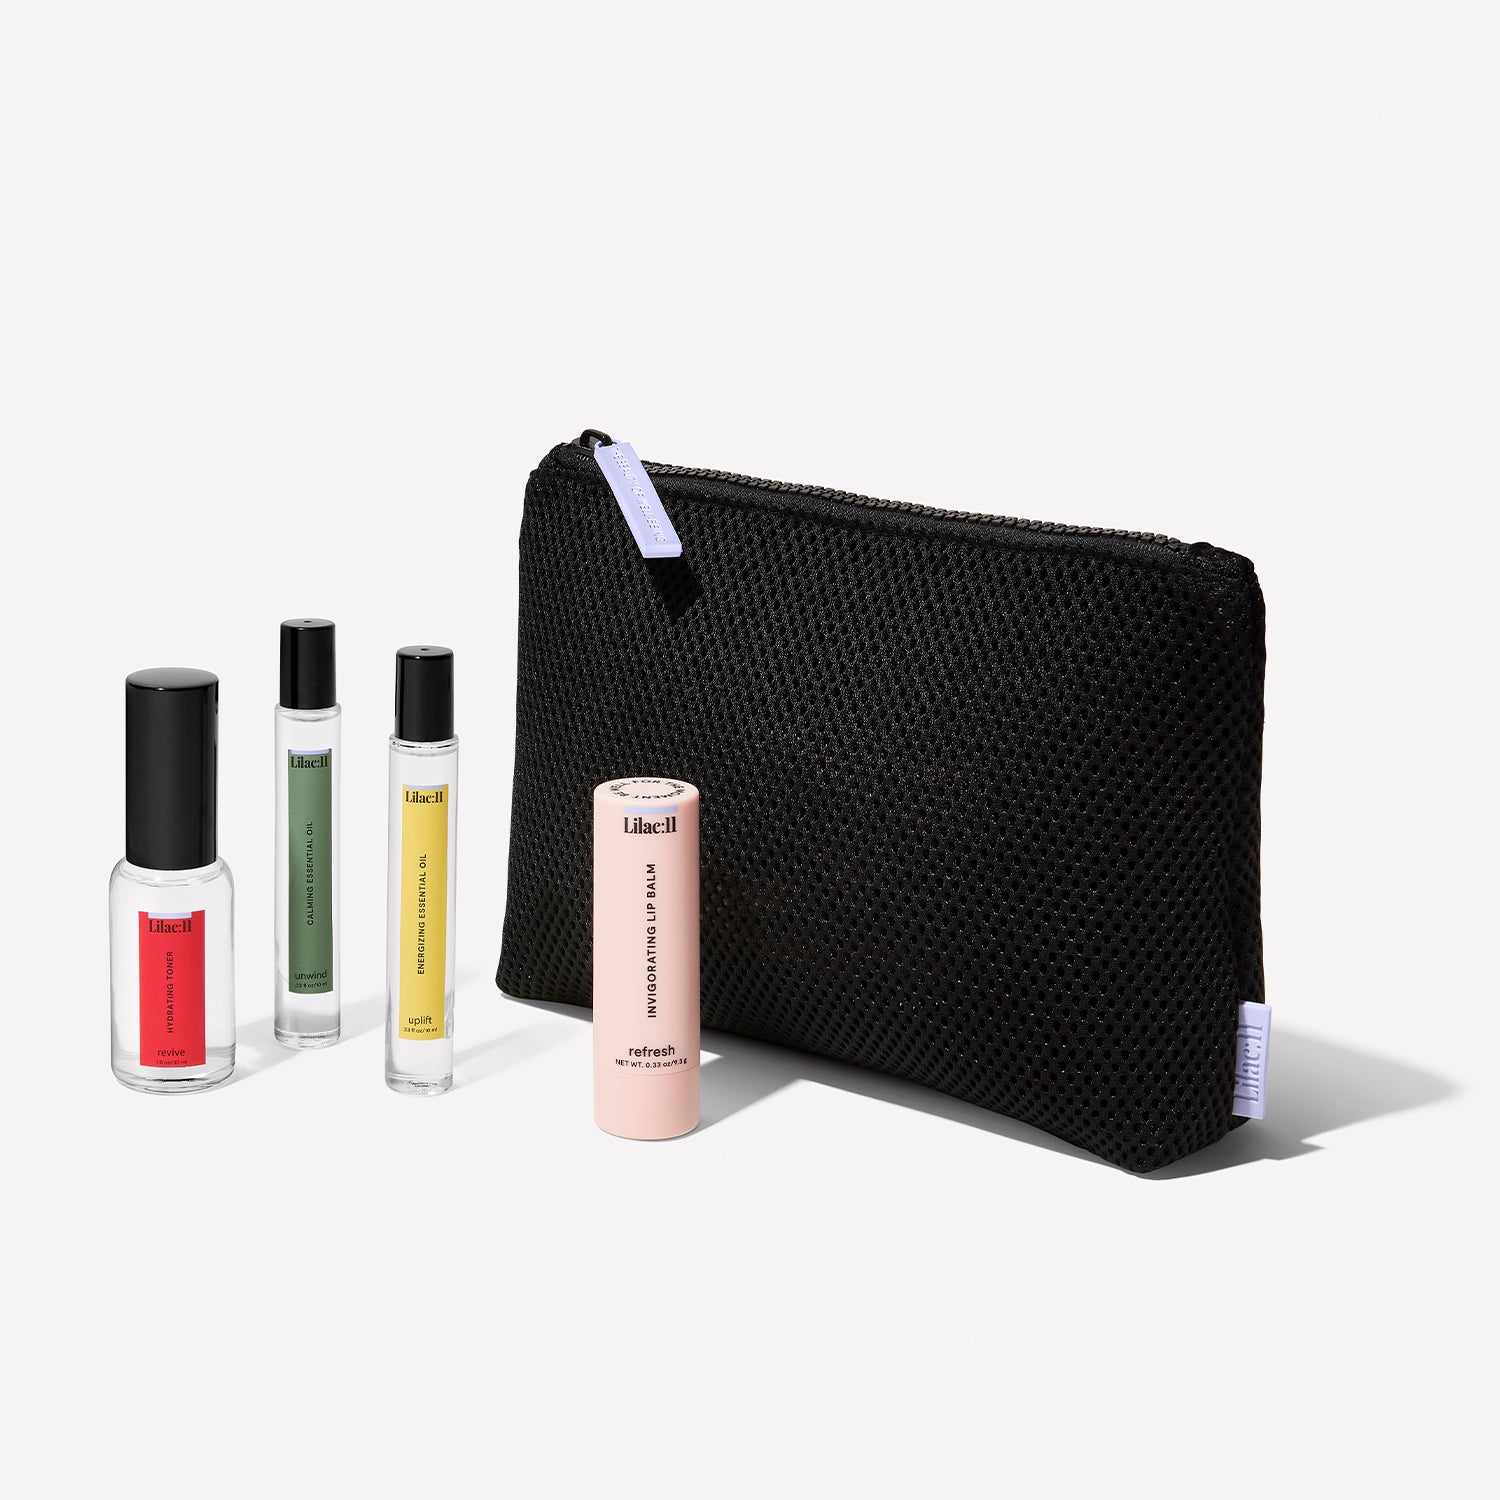 The Be Well for the Moment Kit with the hydrating toner, calming essential oil, energizing essential oil, invigorating lip balm and black mesh bag.